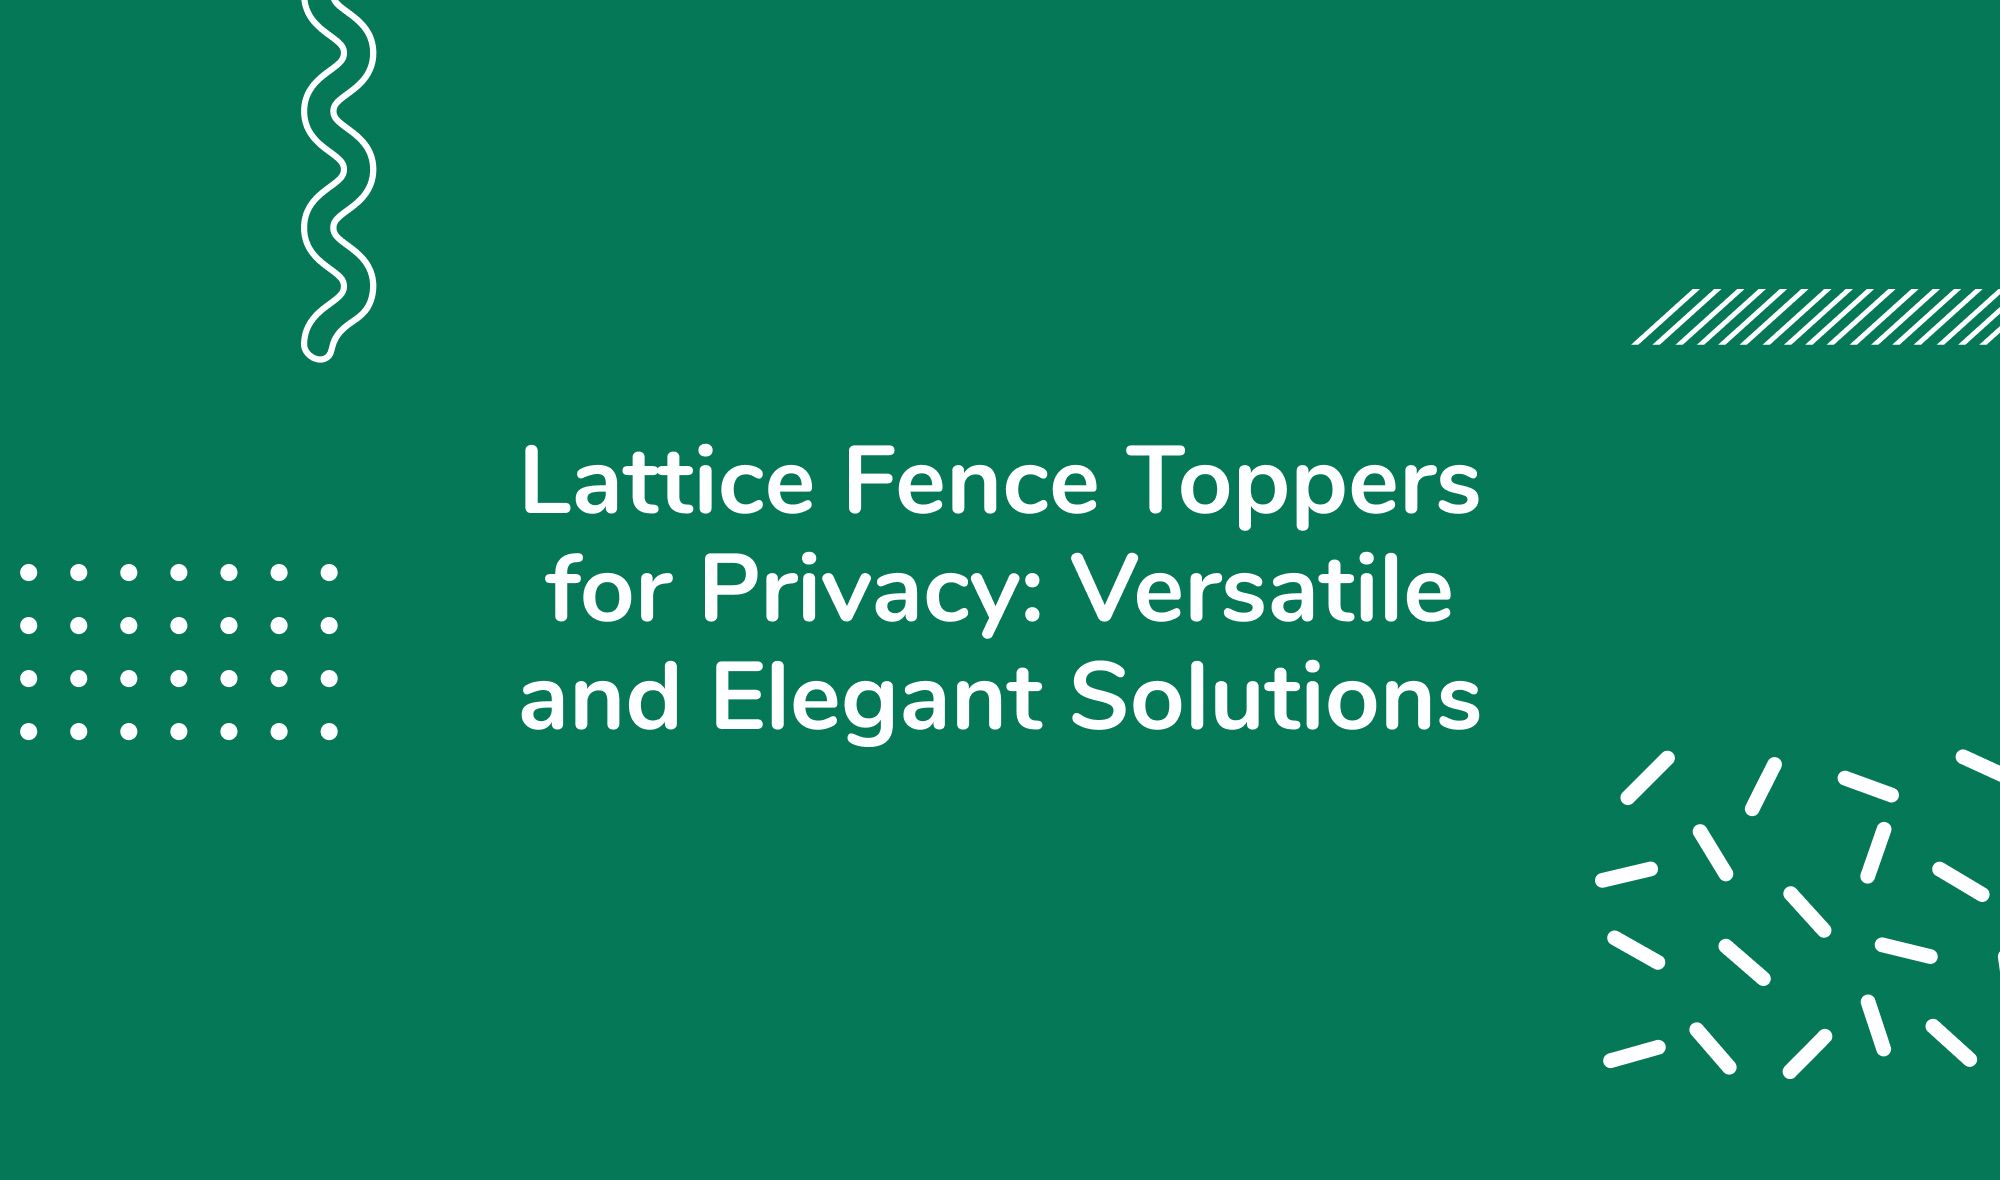 Lattice Fence Toppers for Privacy: Versatile and Elegant Solutions